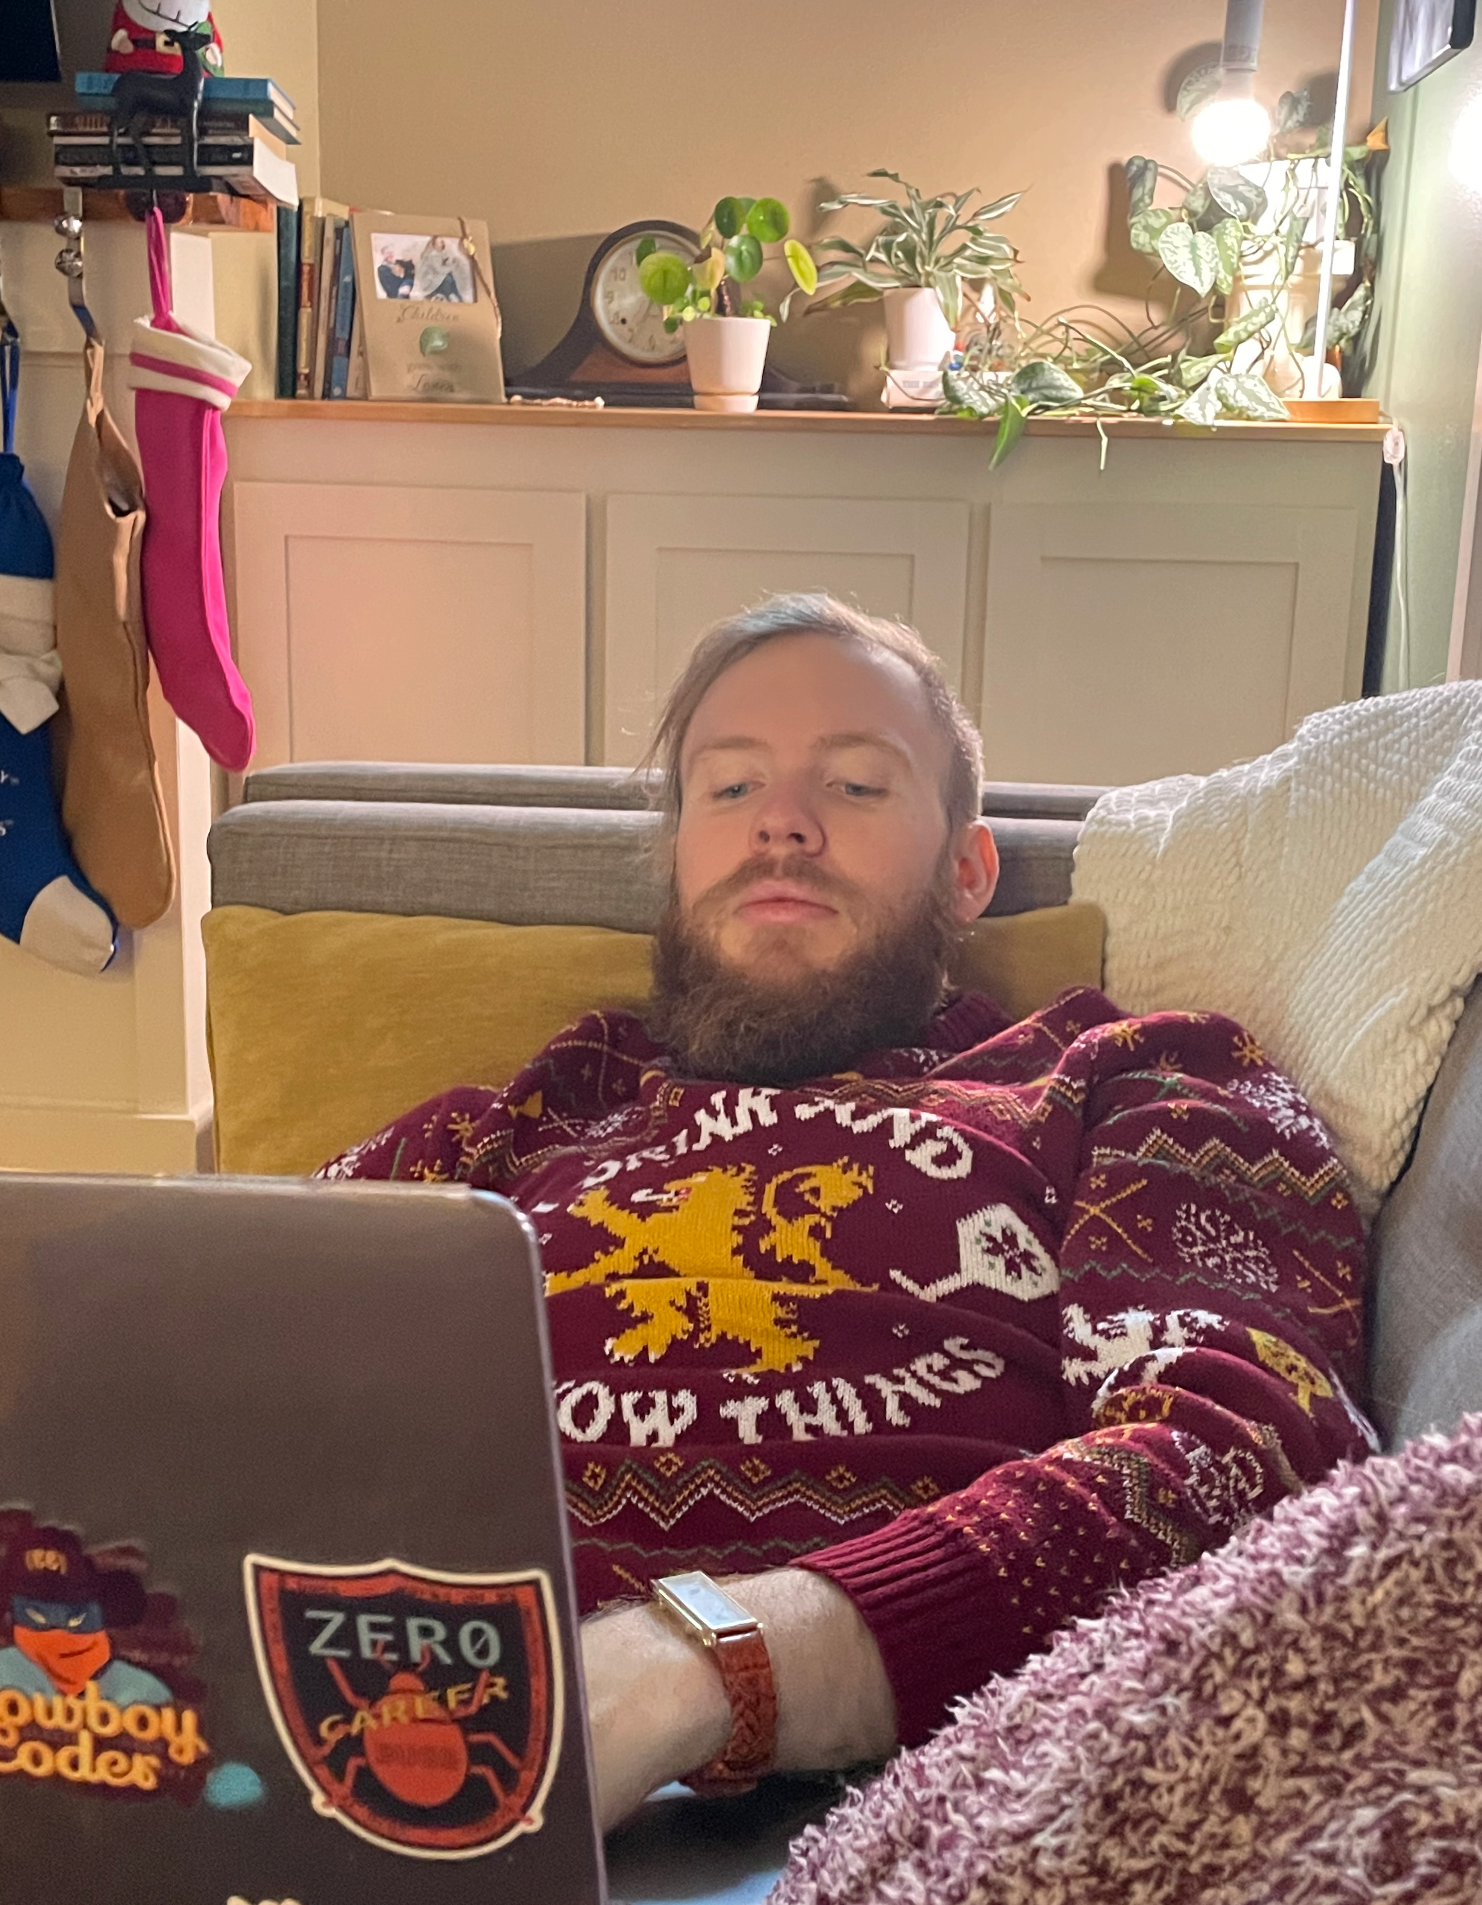 The author in a sweater on the couch writing on a laptop.